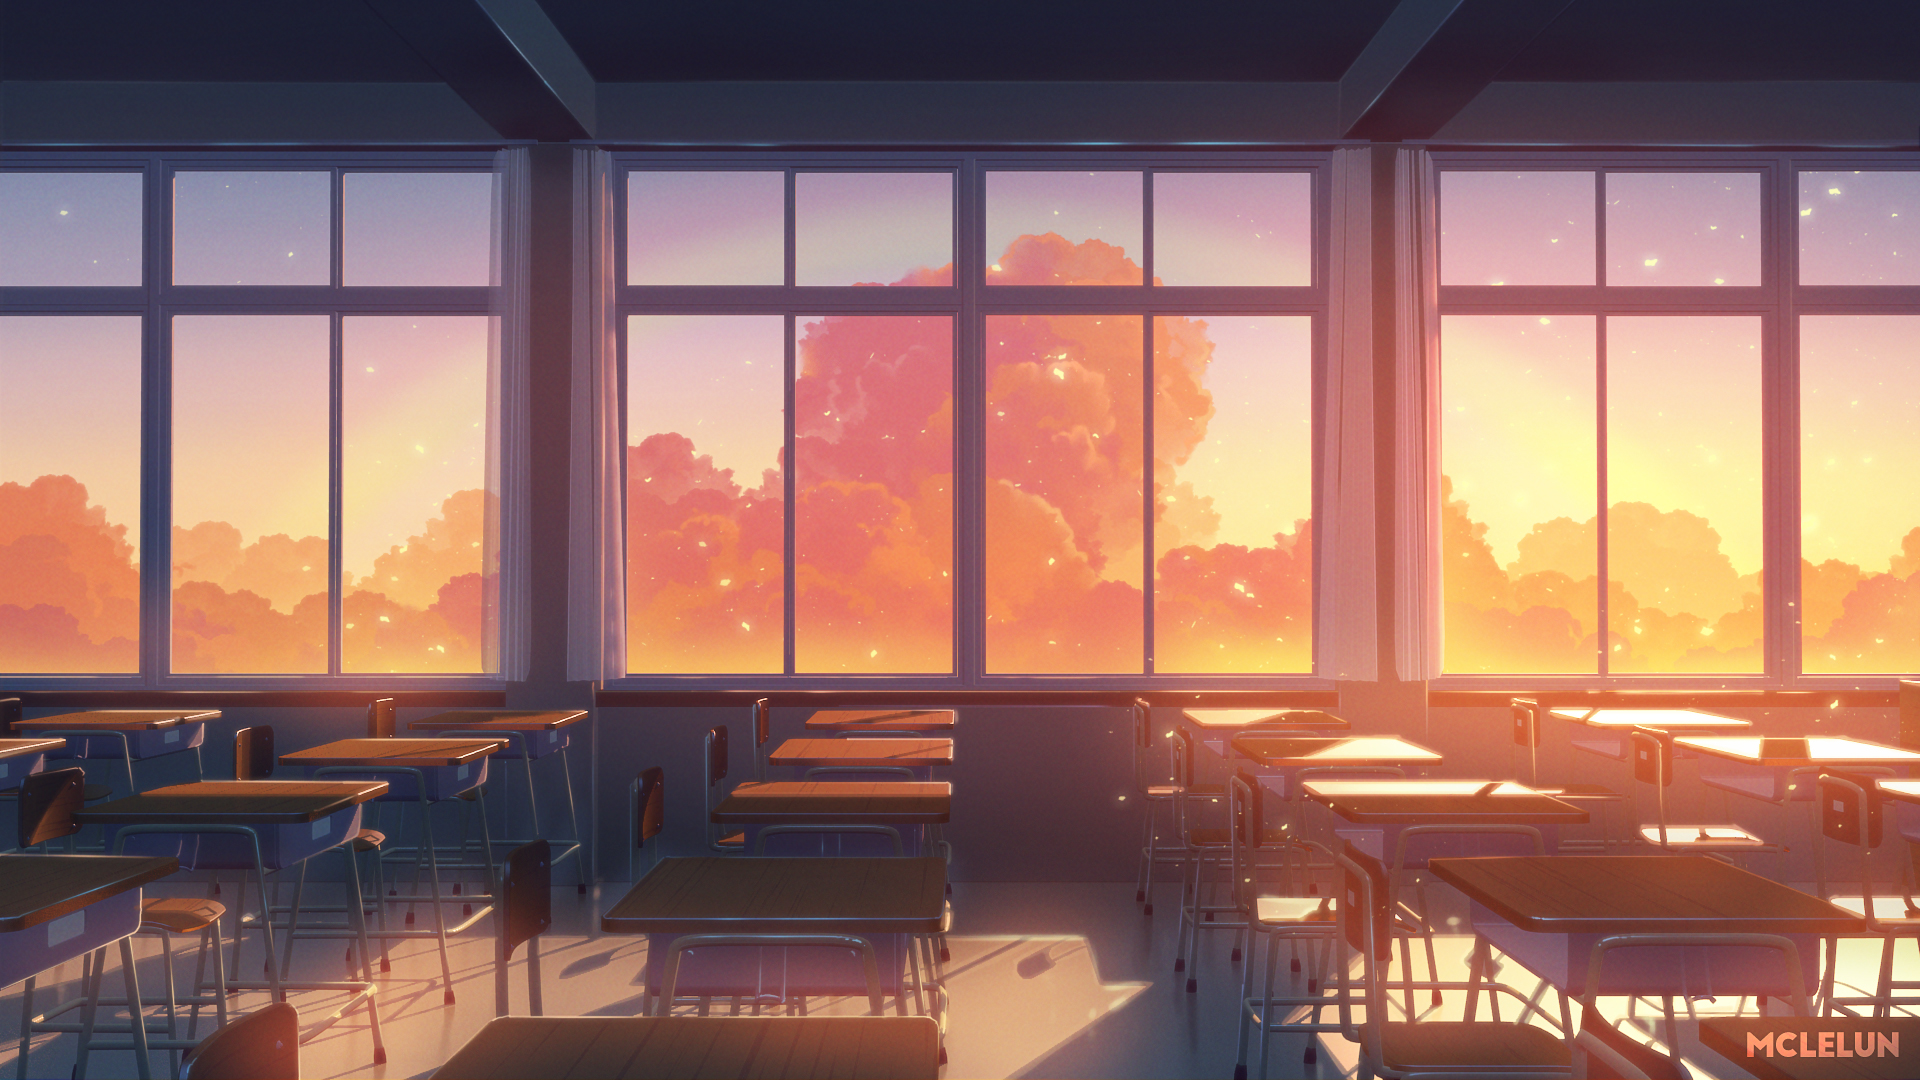 Evening Classroom by Mclelun